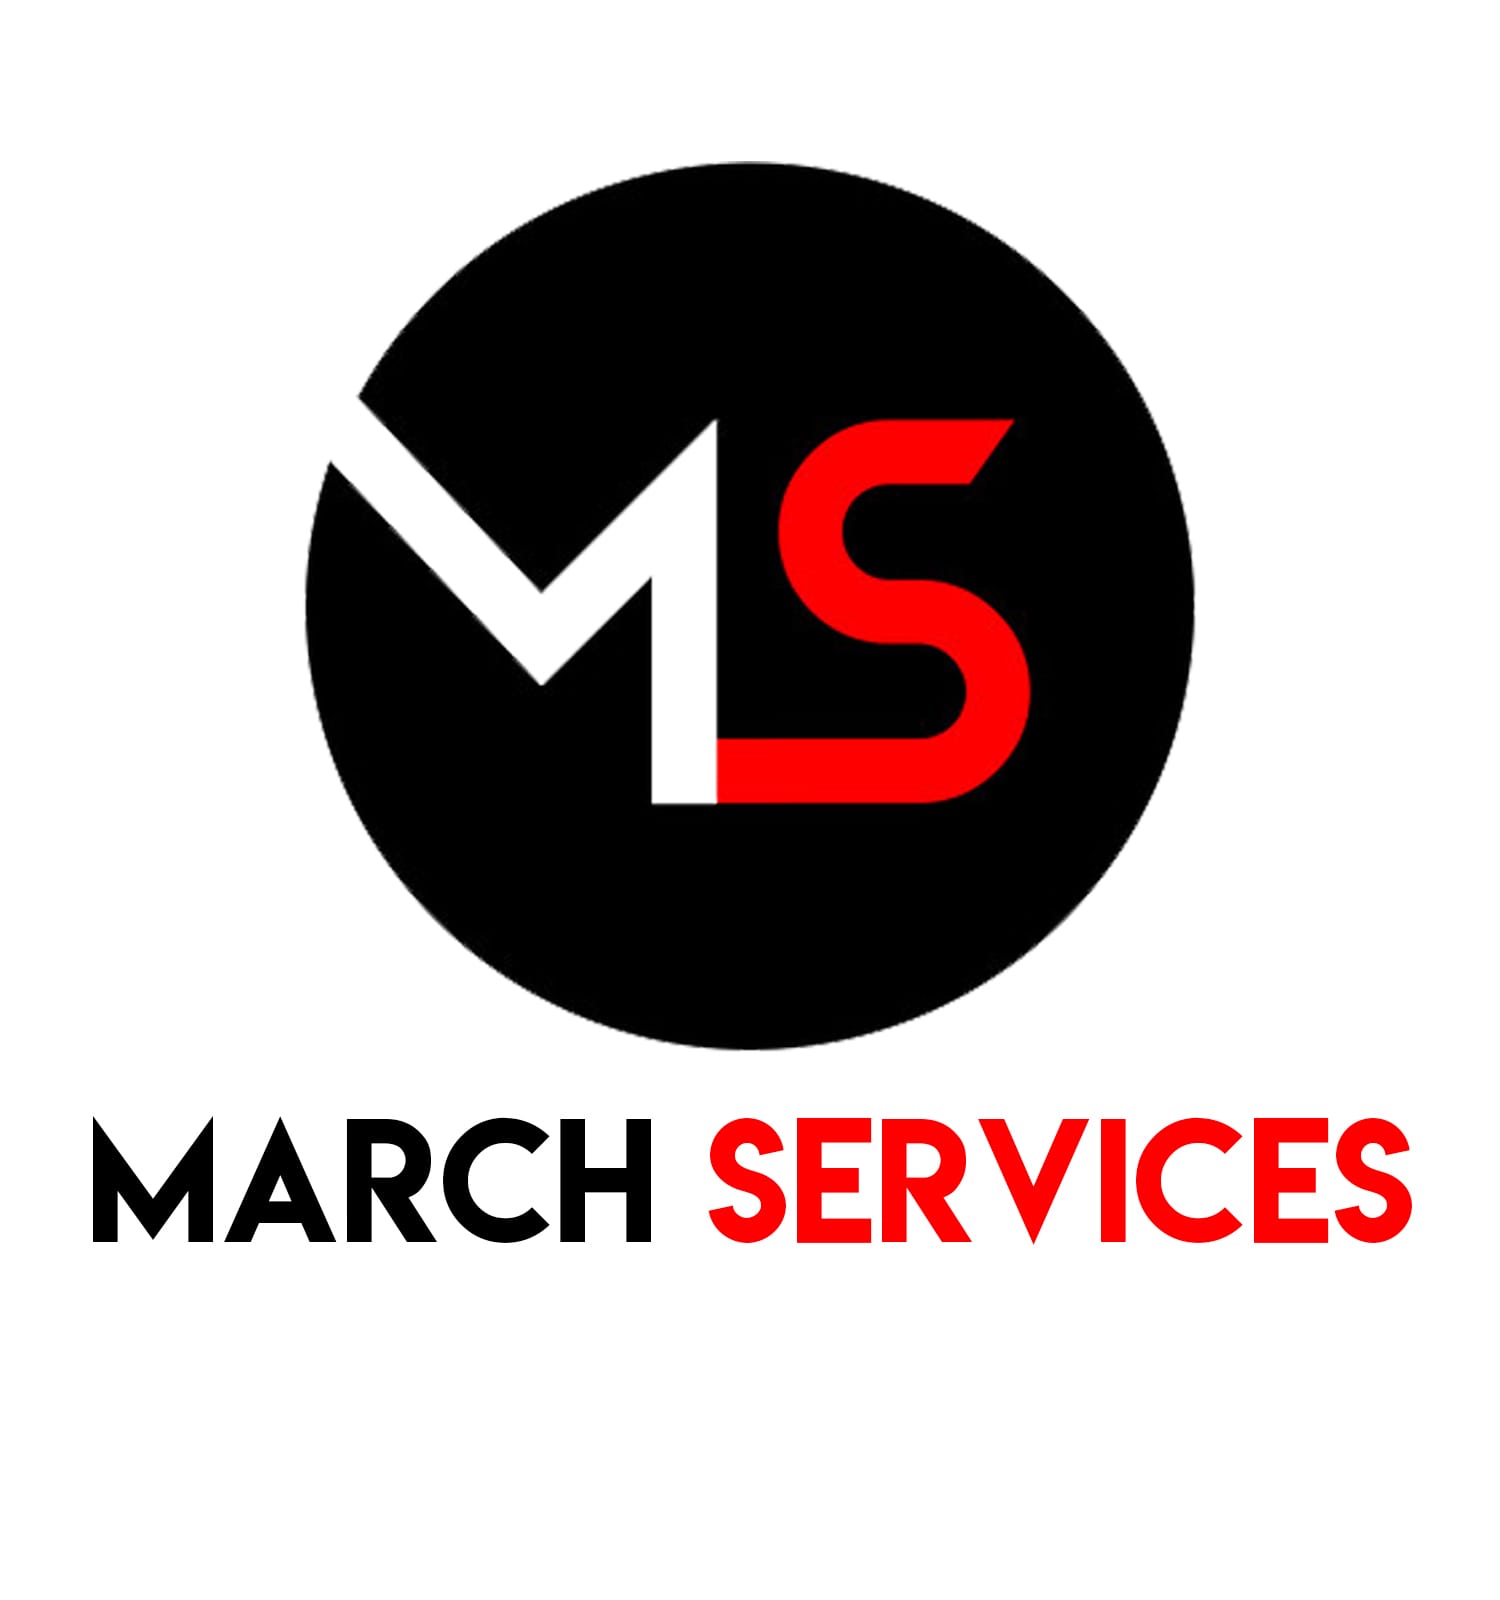 March Services